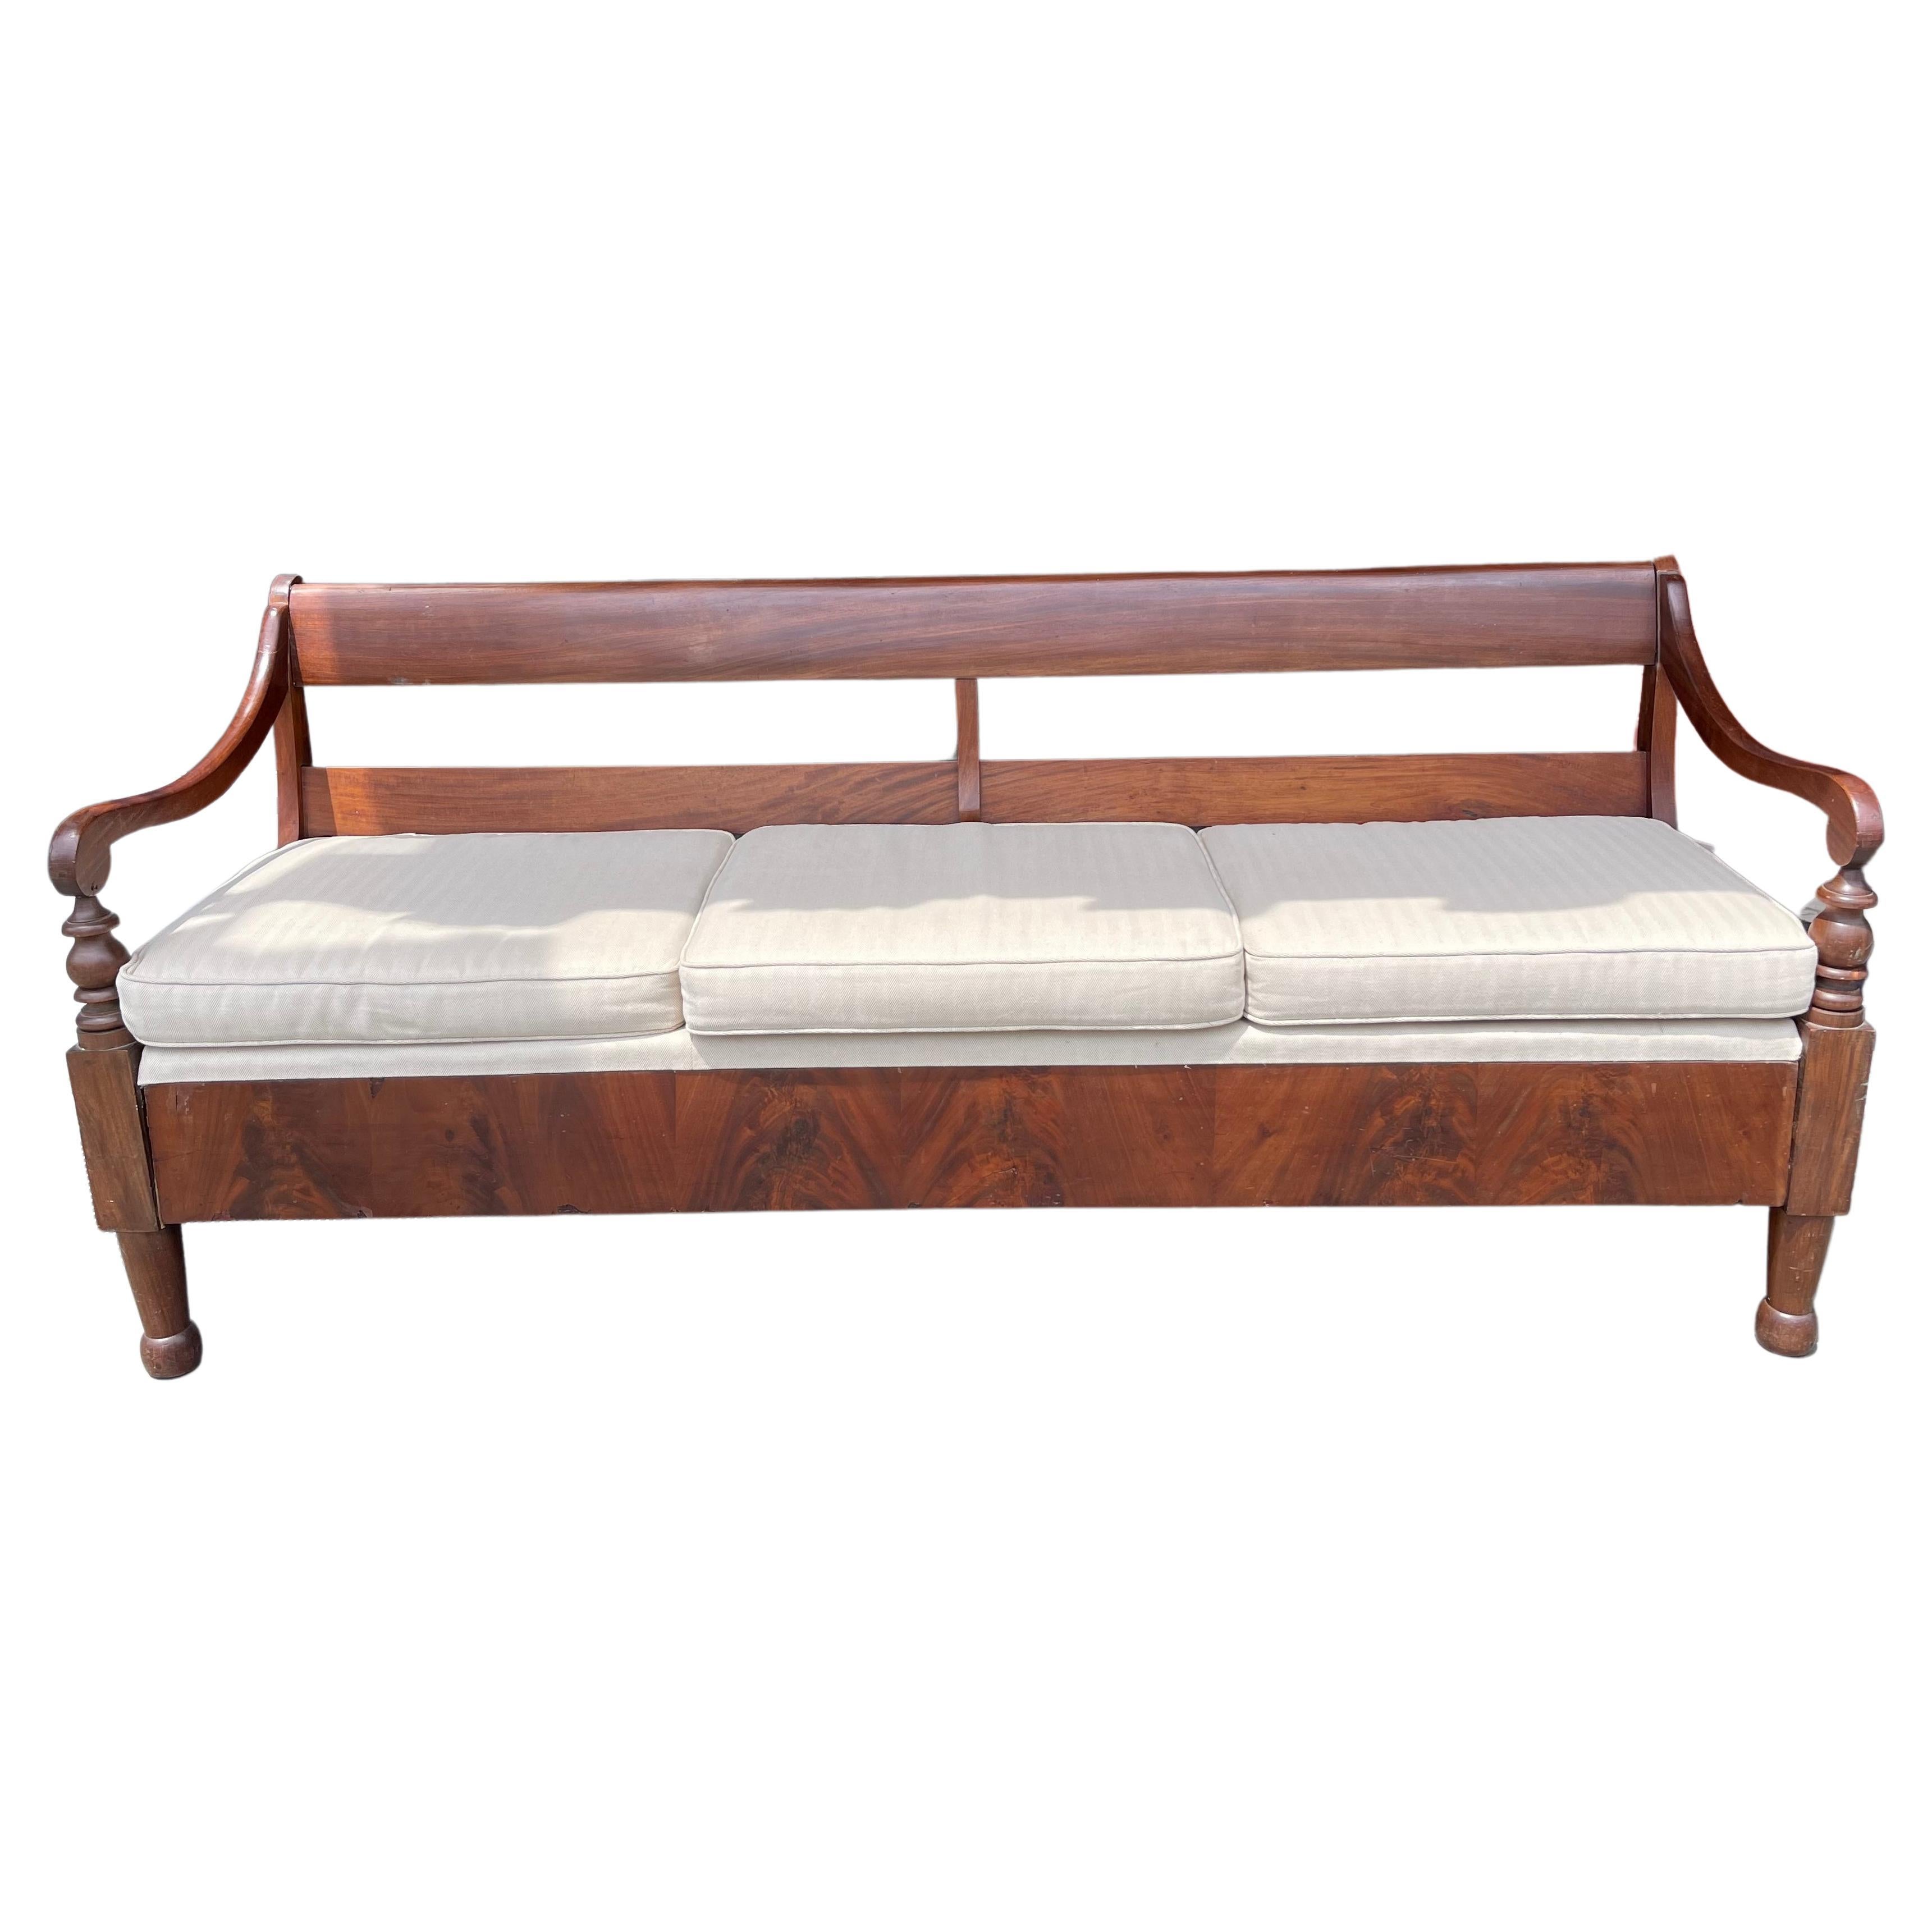 Mahogany Campaign Style Settee or Daybed Late 19th Century For Sale